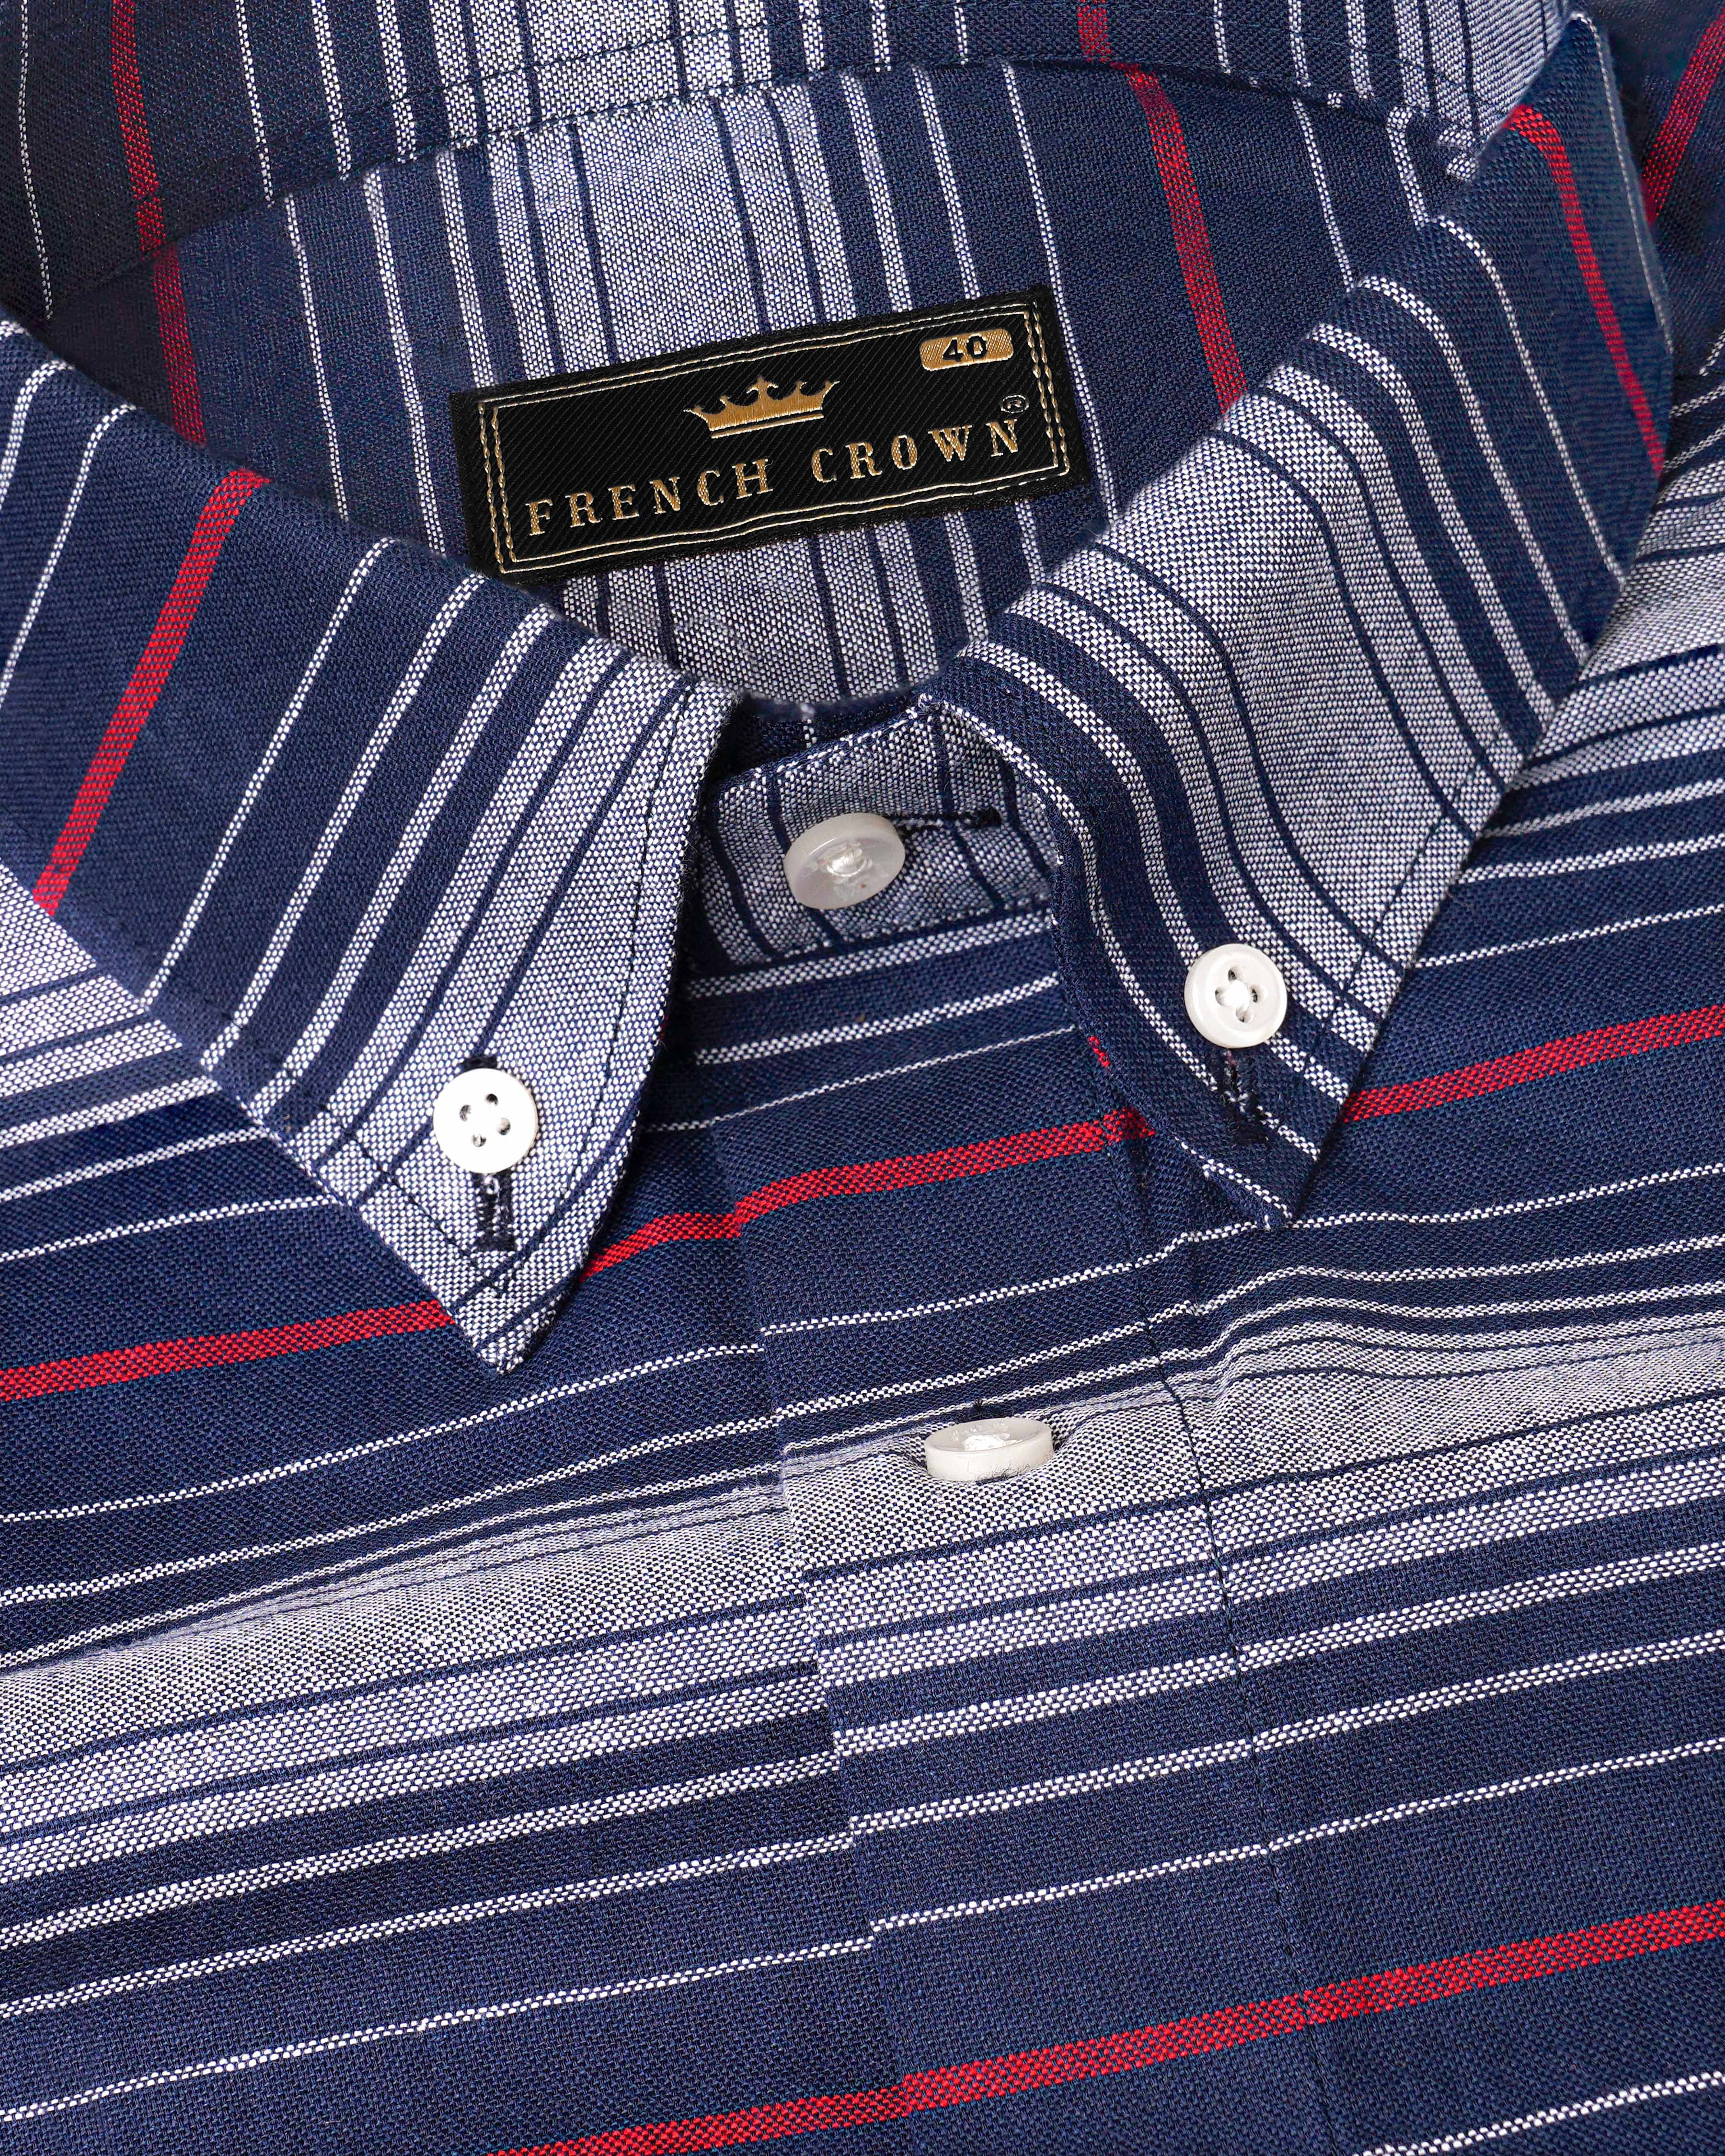 Bunting Navy Blue with Bright White and Cardinal Red Striped Royal Oxford Shirt